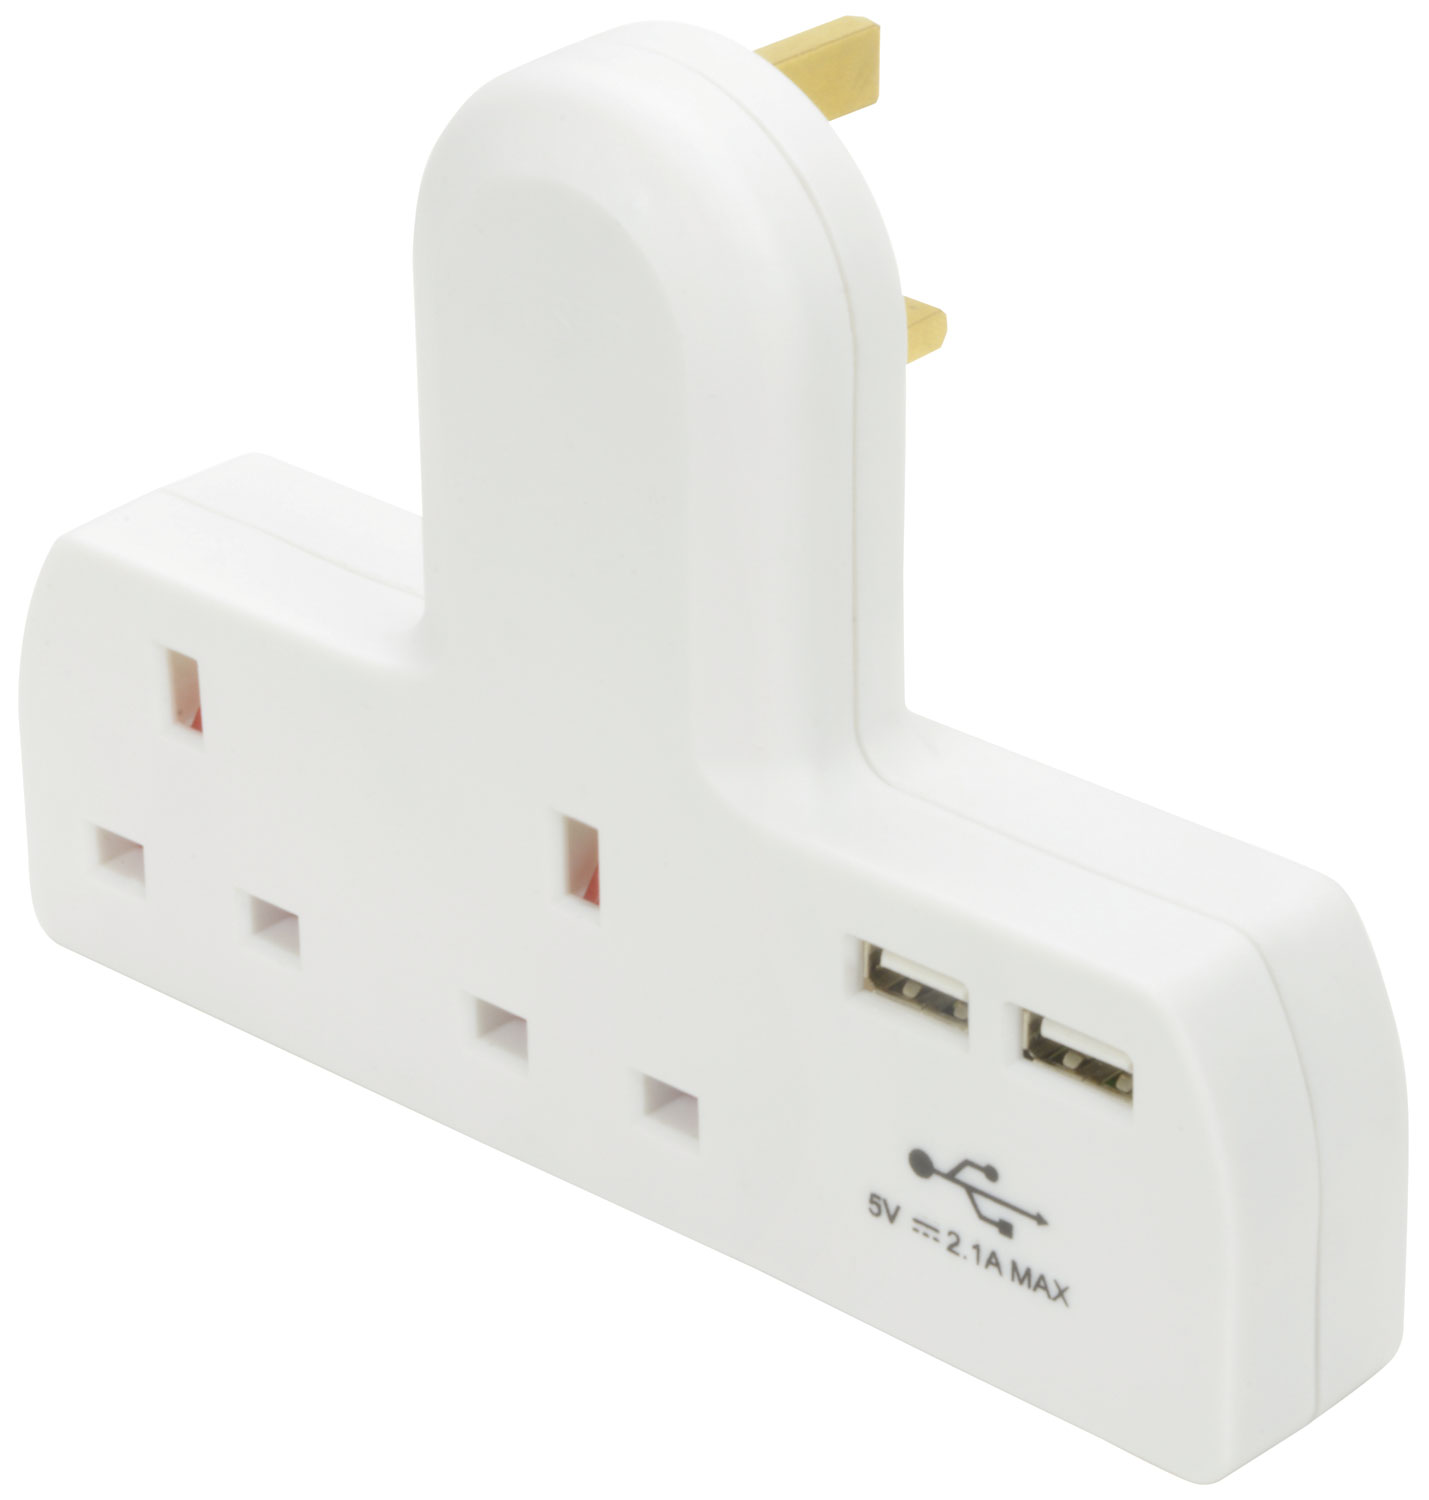 2 Way Plug Adapter With 2 USB Charger Ports Multi Sockets Extension UK Mains 